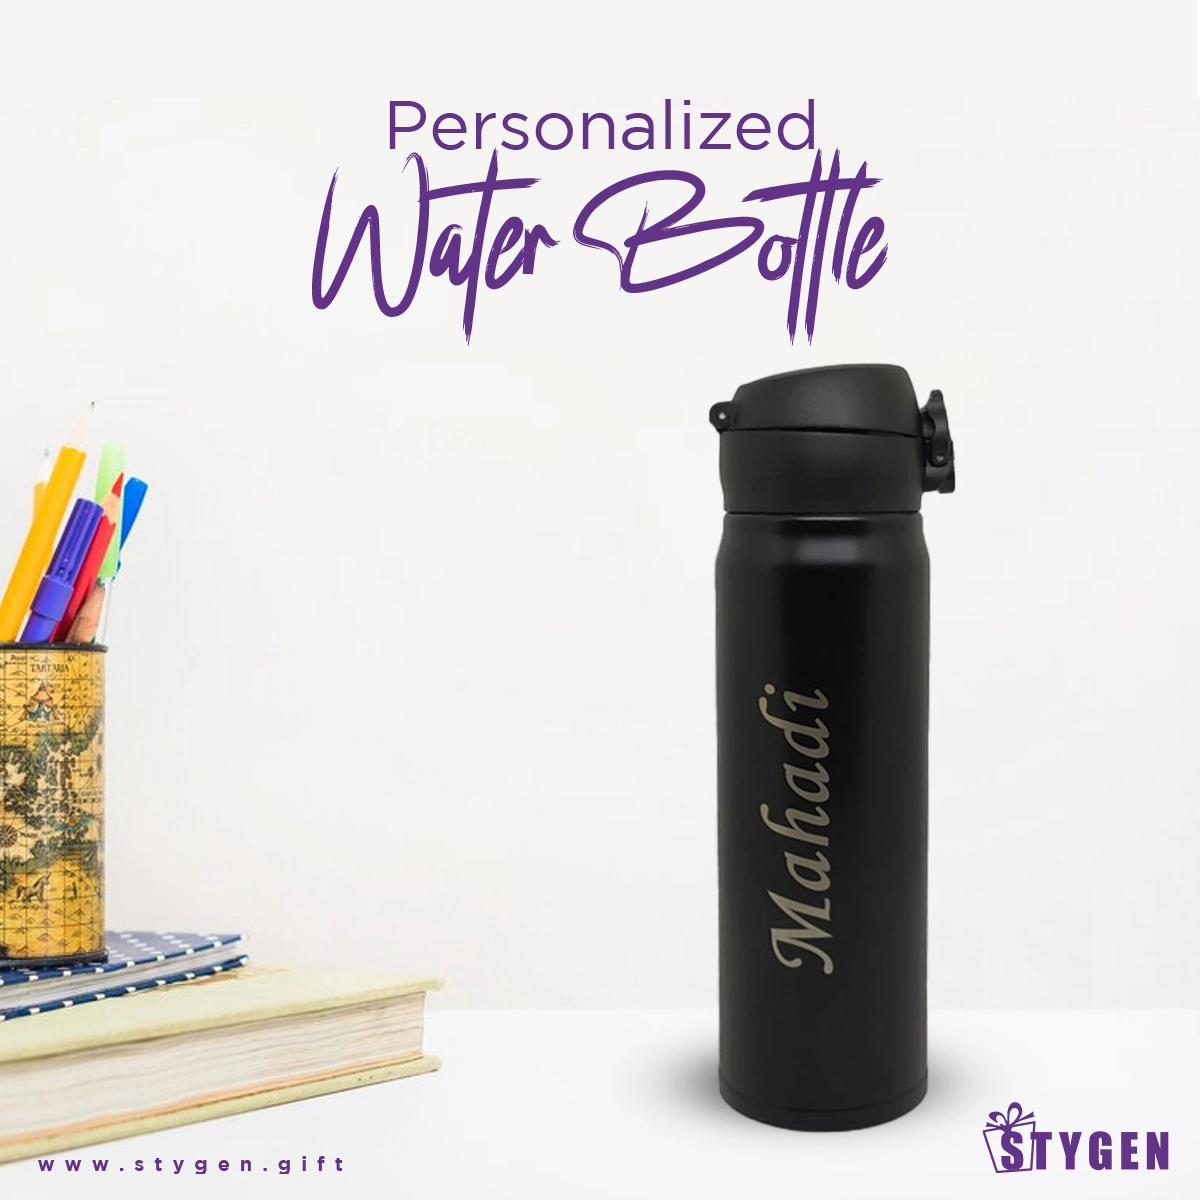 Personalized Thermos Water Bottle for your loved one (02)